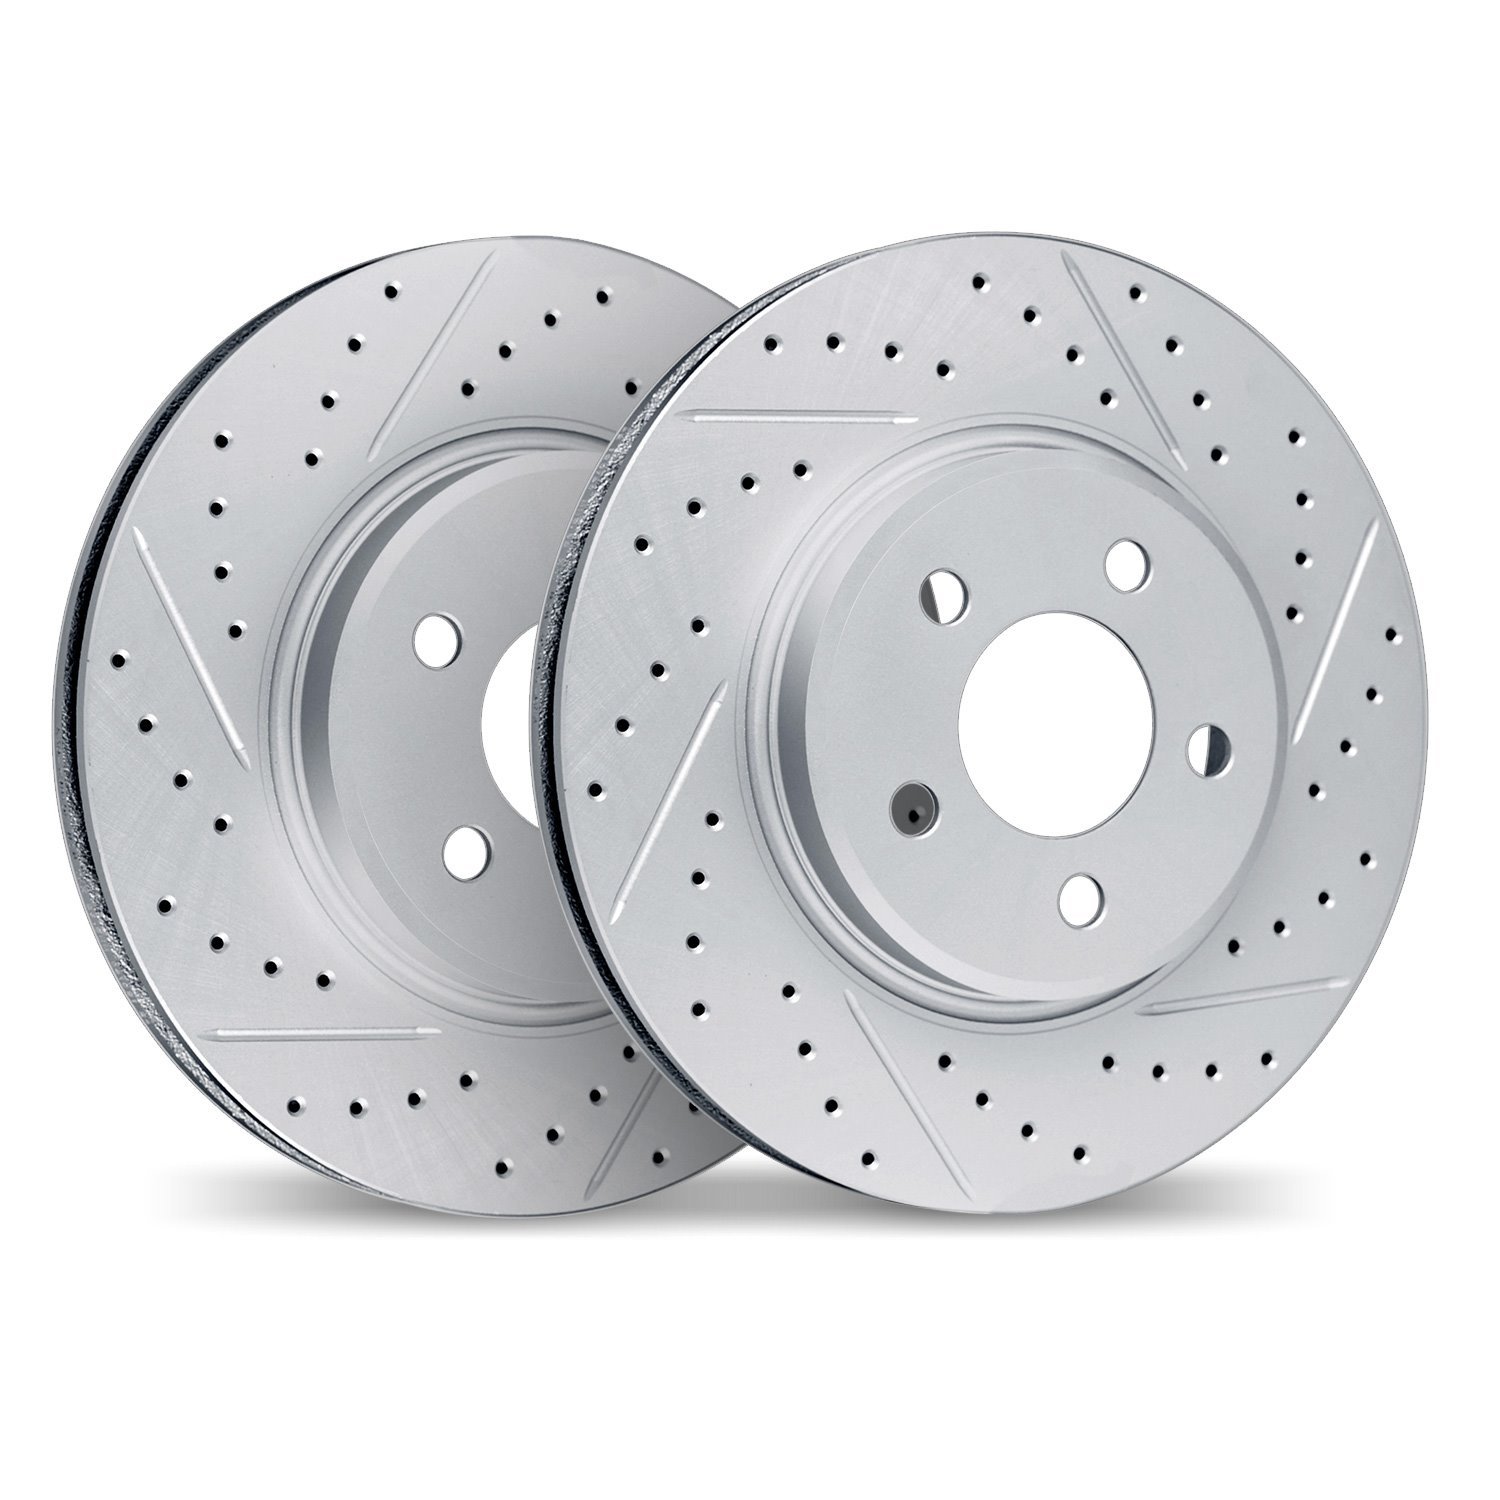 2002-75013 Geoperformance Drilled/Slotted Brake Rotors, 2010-2017 Lexus/Toyota/Scion, Position: Front